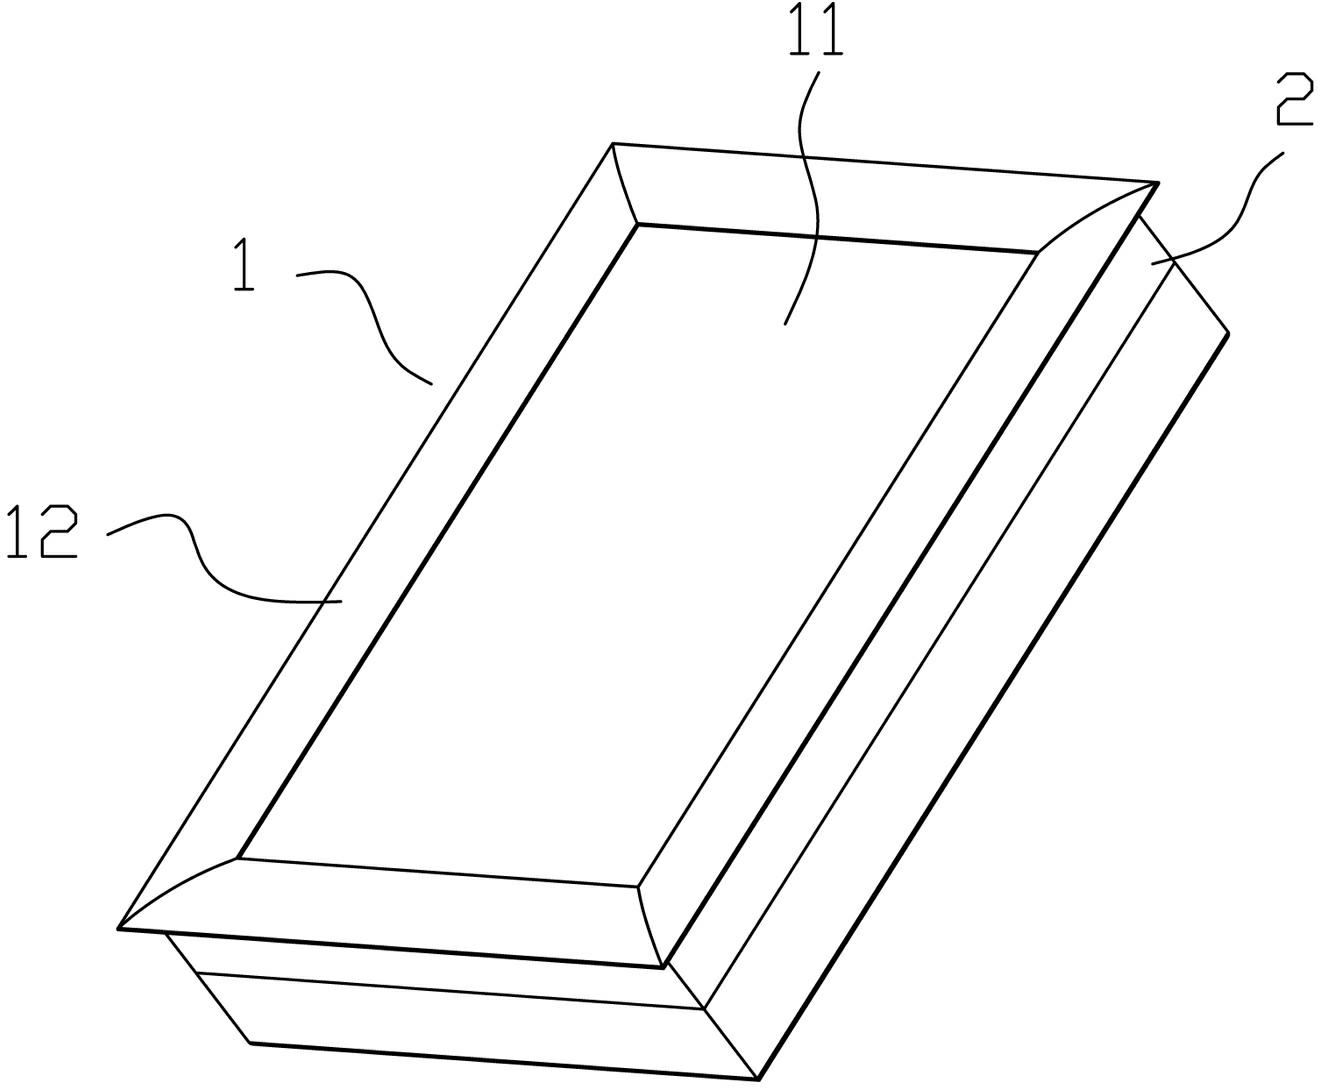 Wall-embedded mounting system for operation panel